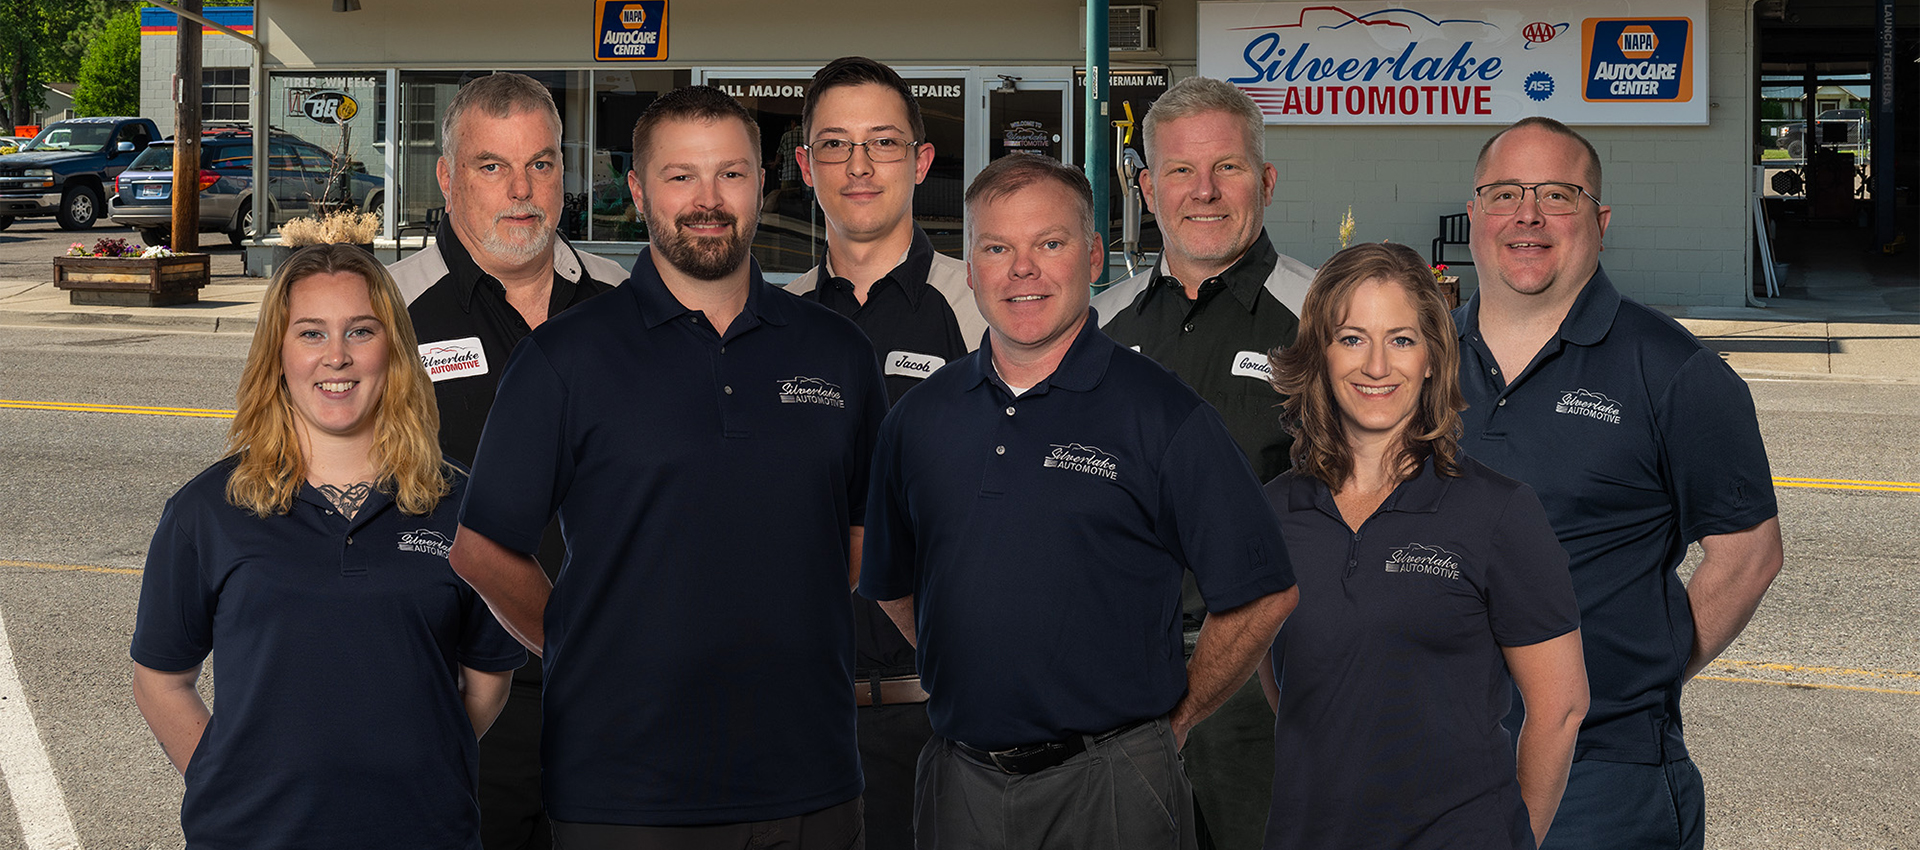 Join Our Team | Silverlake Automotive Downtown